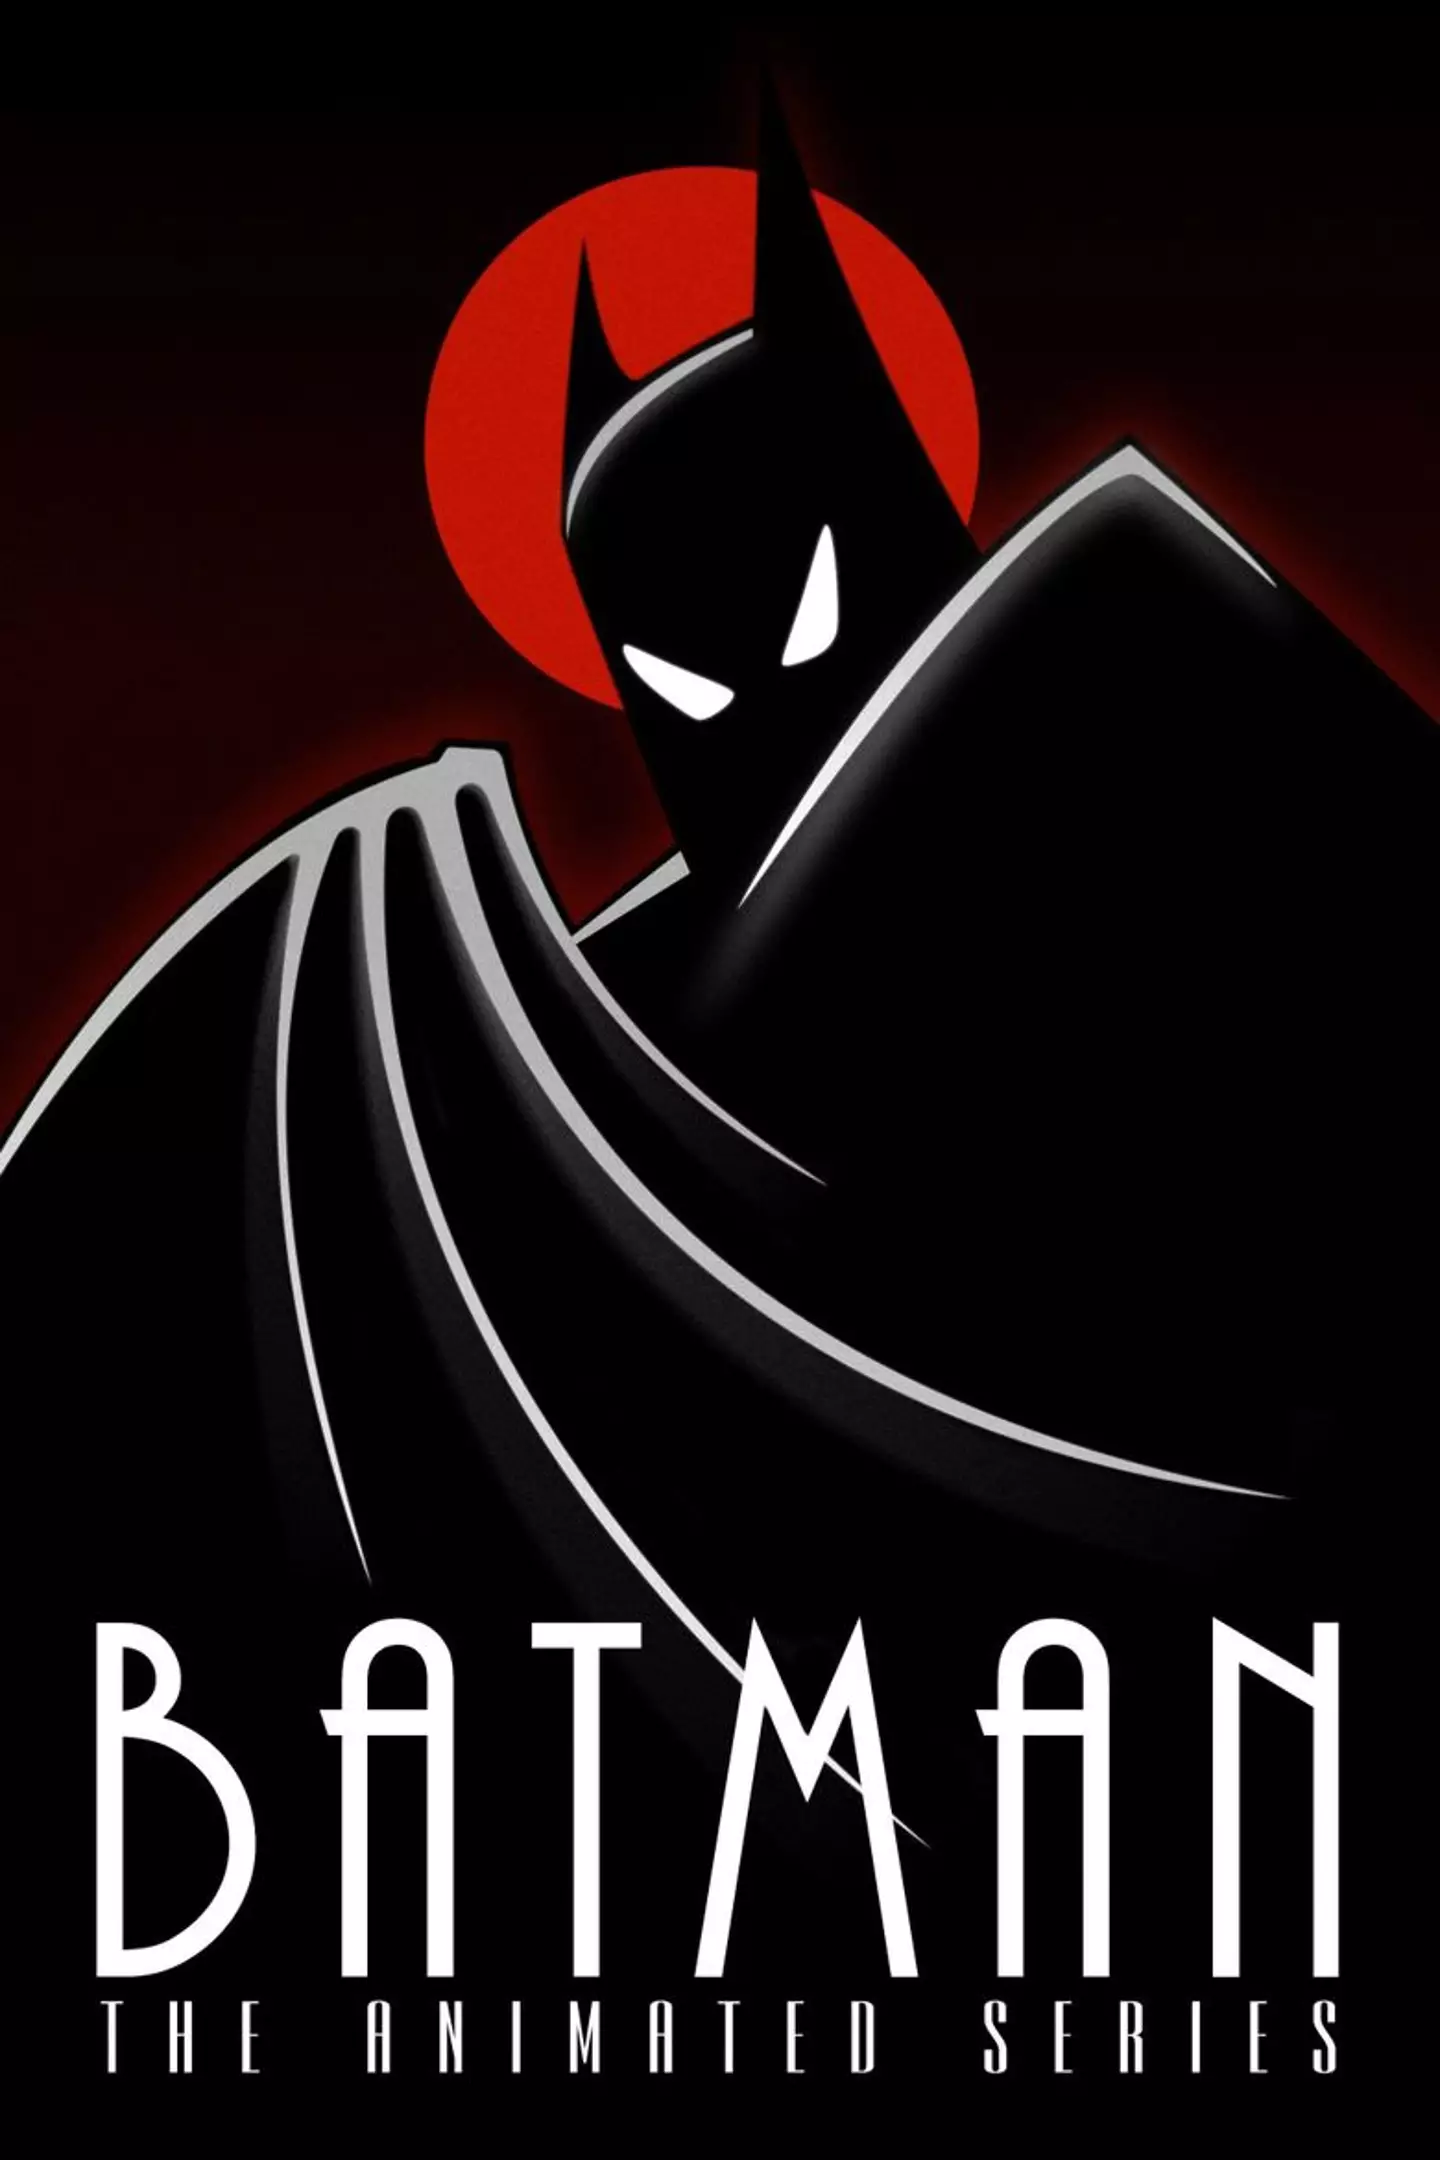 Batman: The Animated Series ran from 1992 to 1996 .